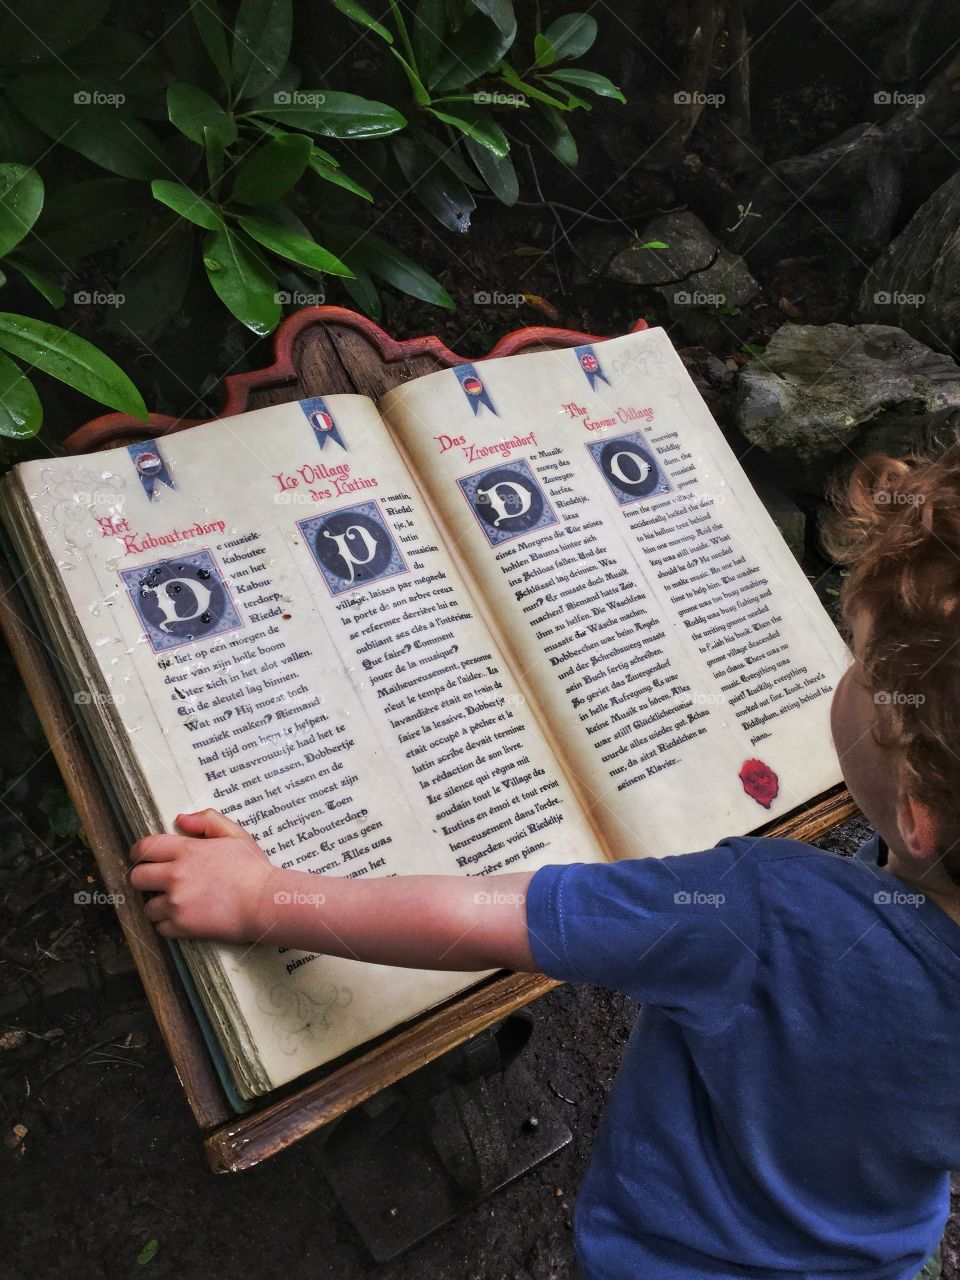 A child is reading an old book